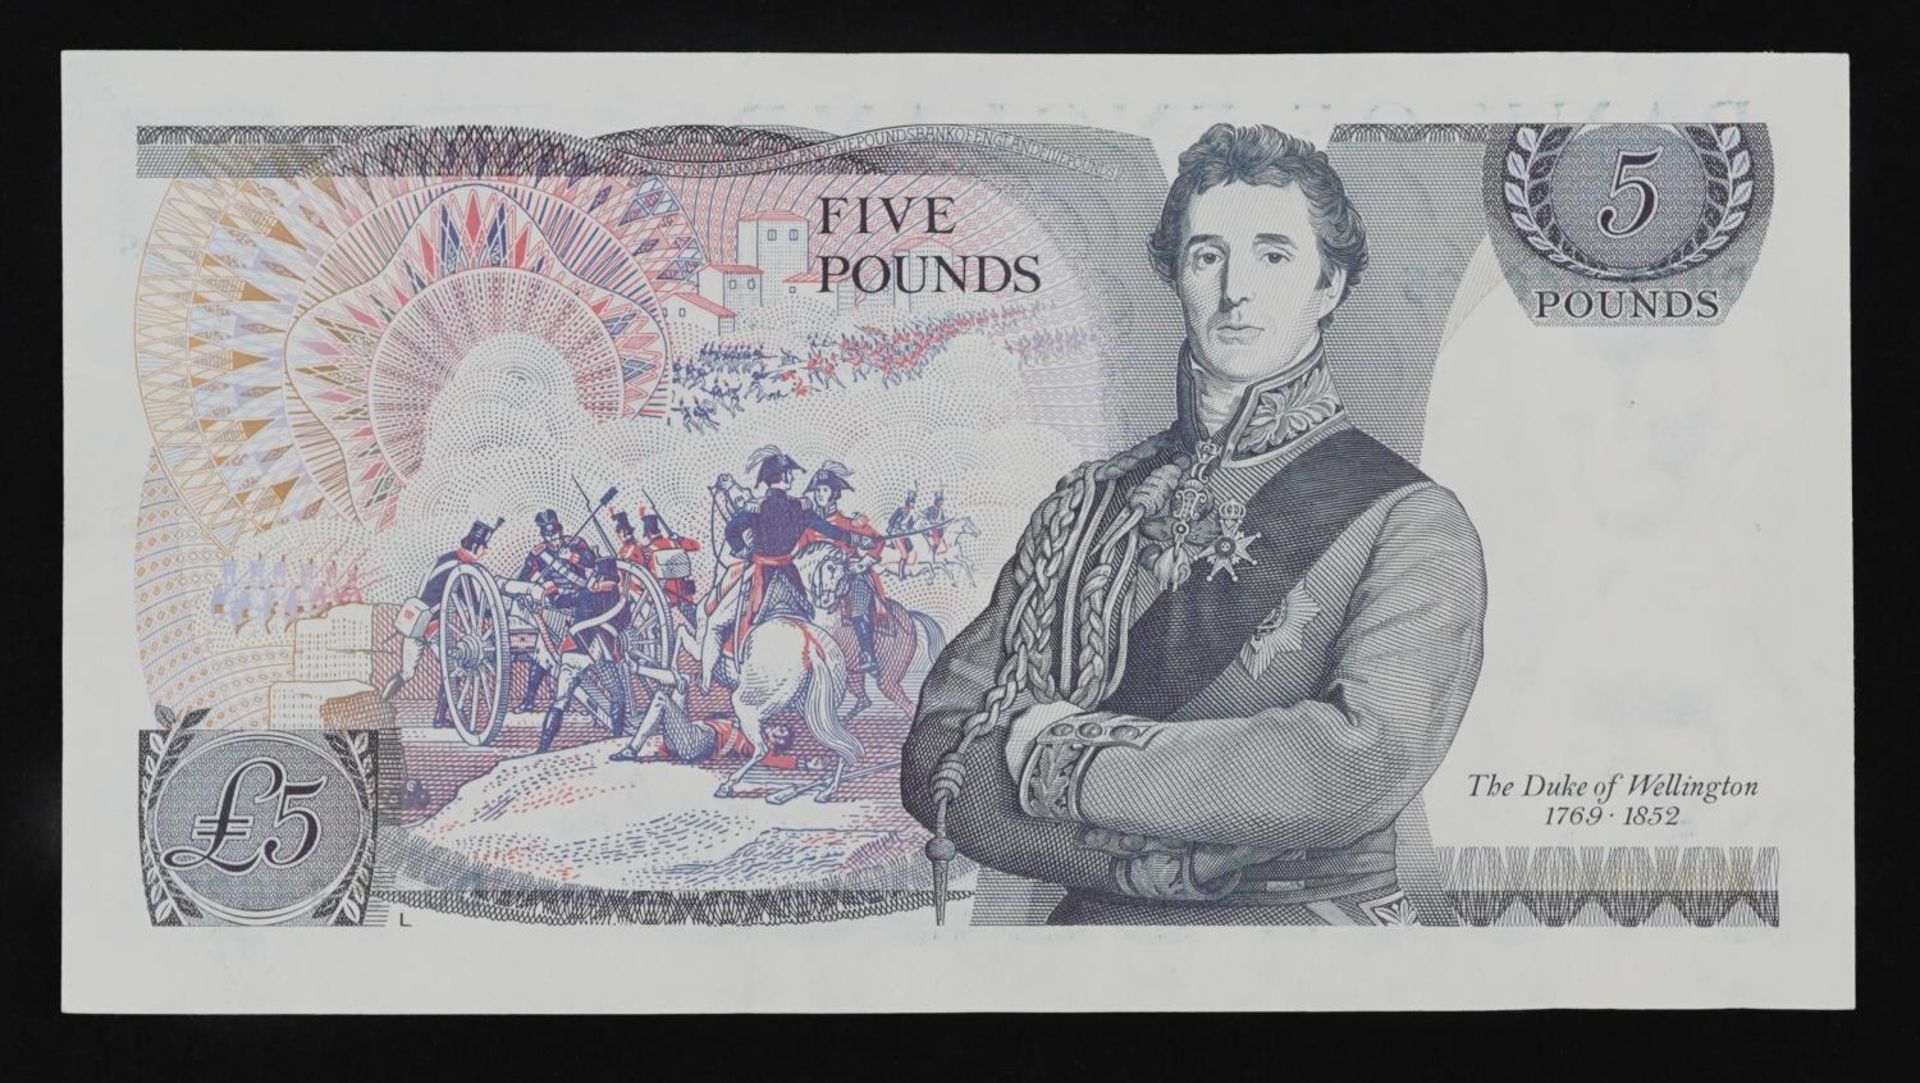 Elizabeth II Bank of England five pound note with error, no Chief Cashier, serial number DU72 446865 - Image 2 of 2